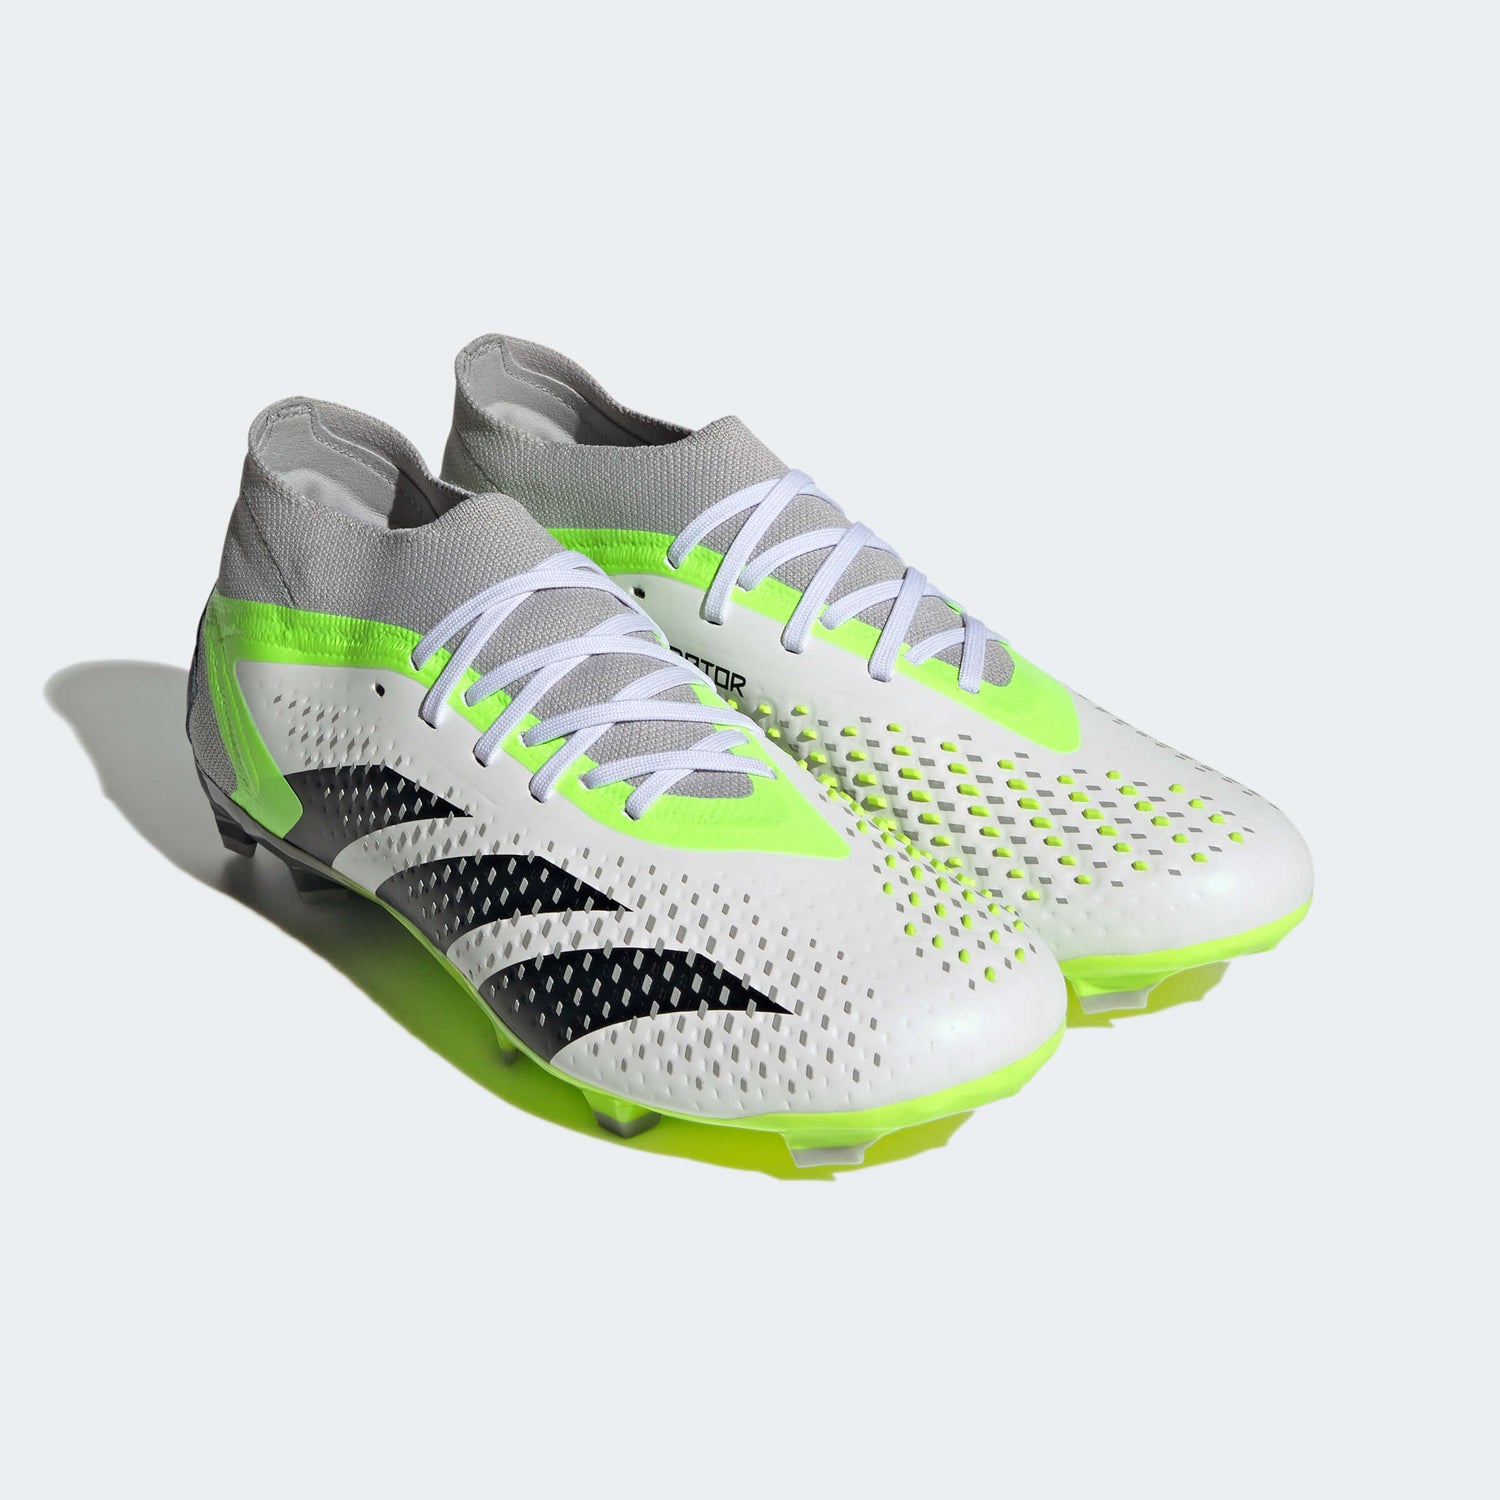 adidas Predator Accuracy.2 FG - Crazyrush Pack (FA23) (Pair - Lateral Front)